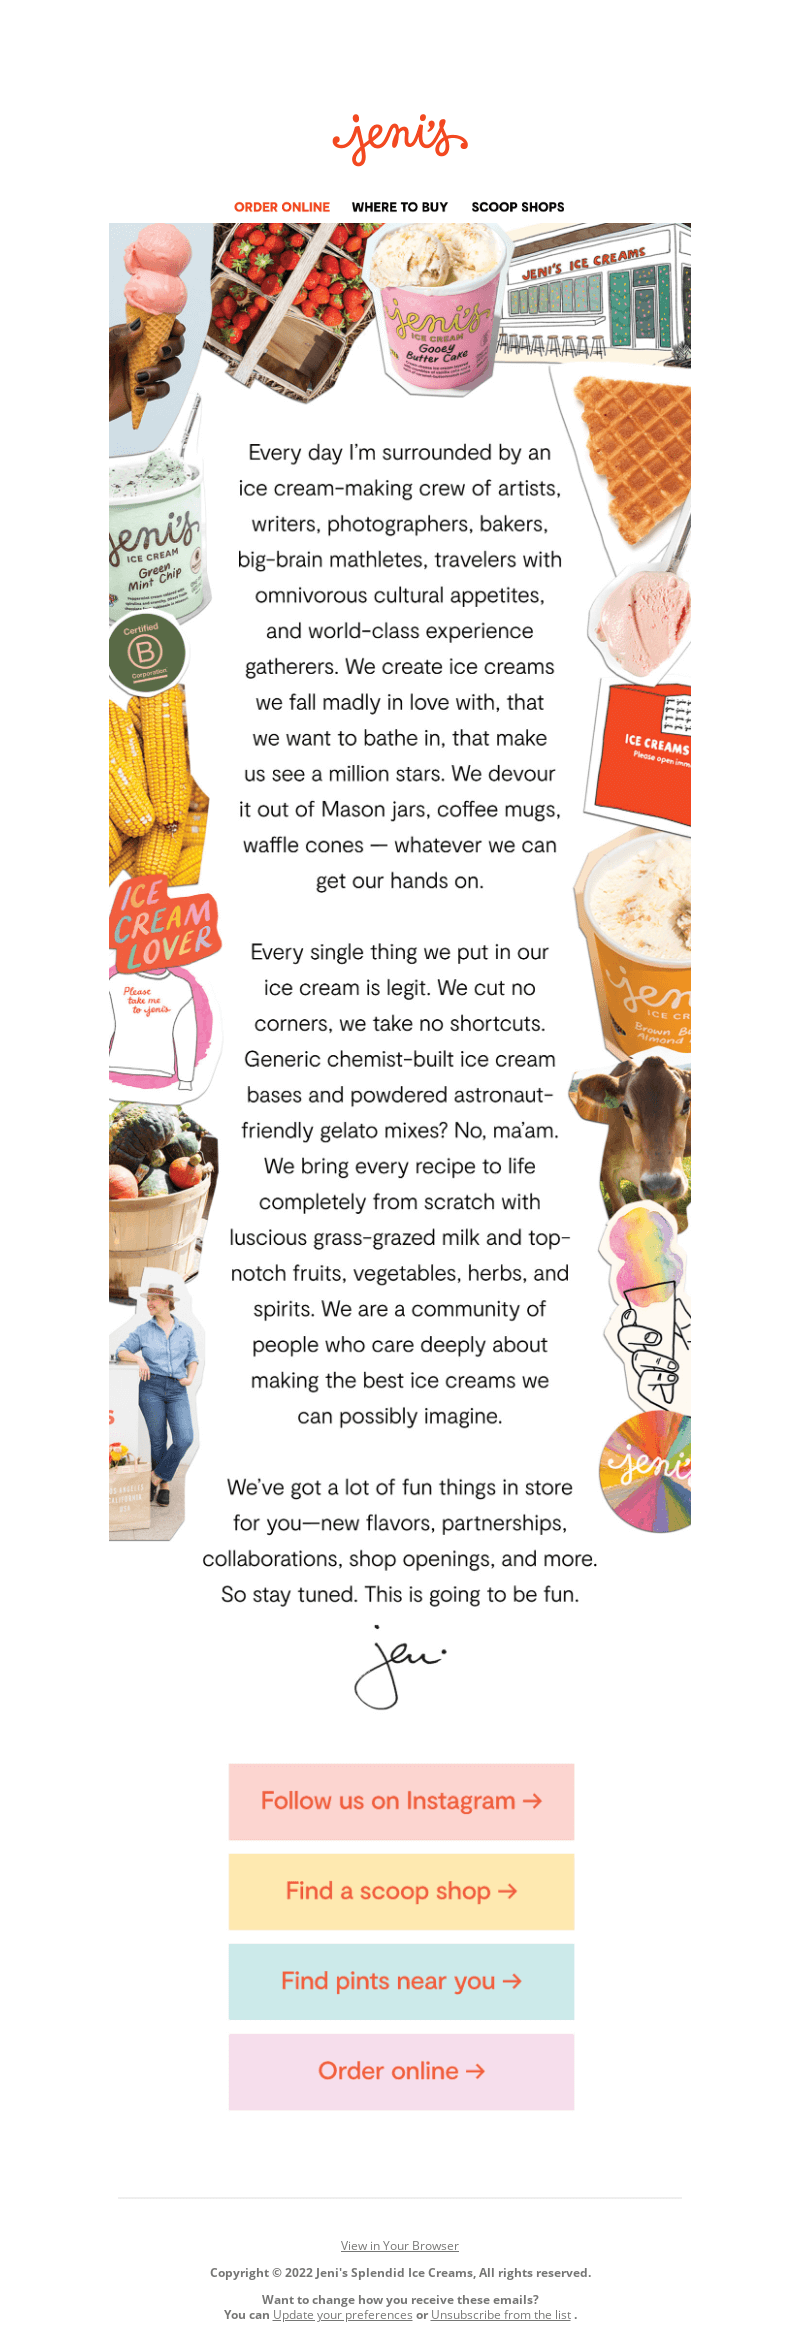 Email from Jeni’s